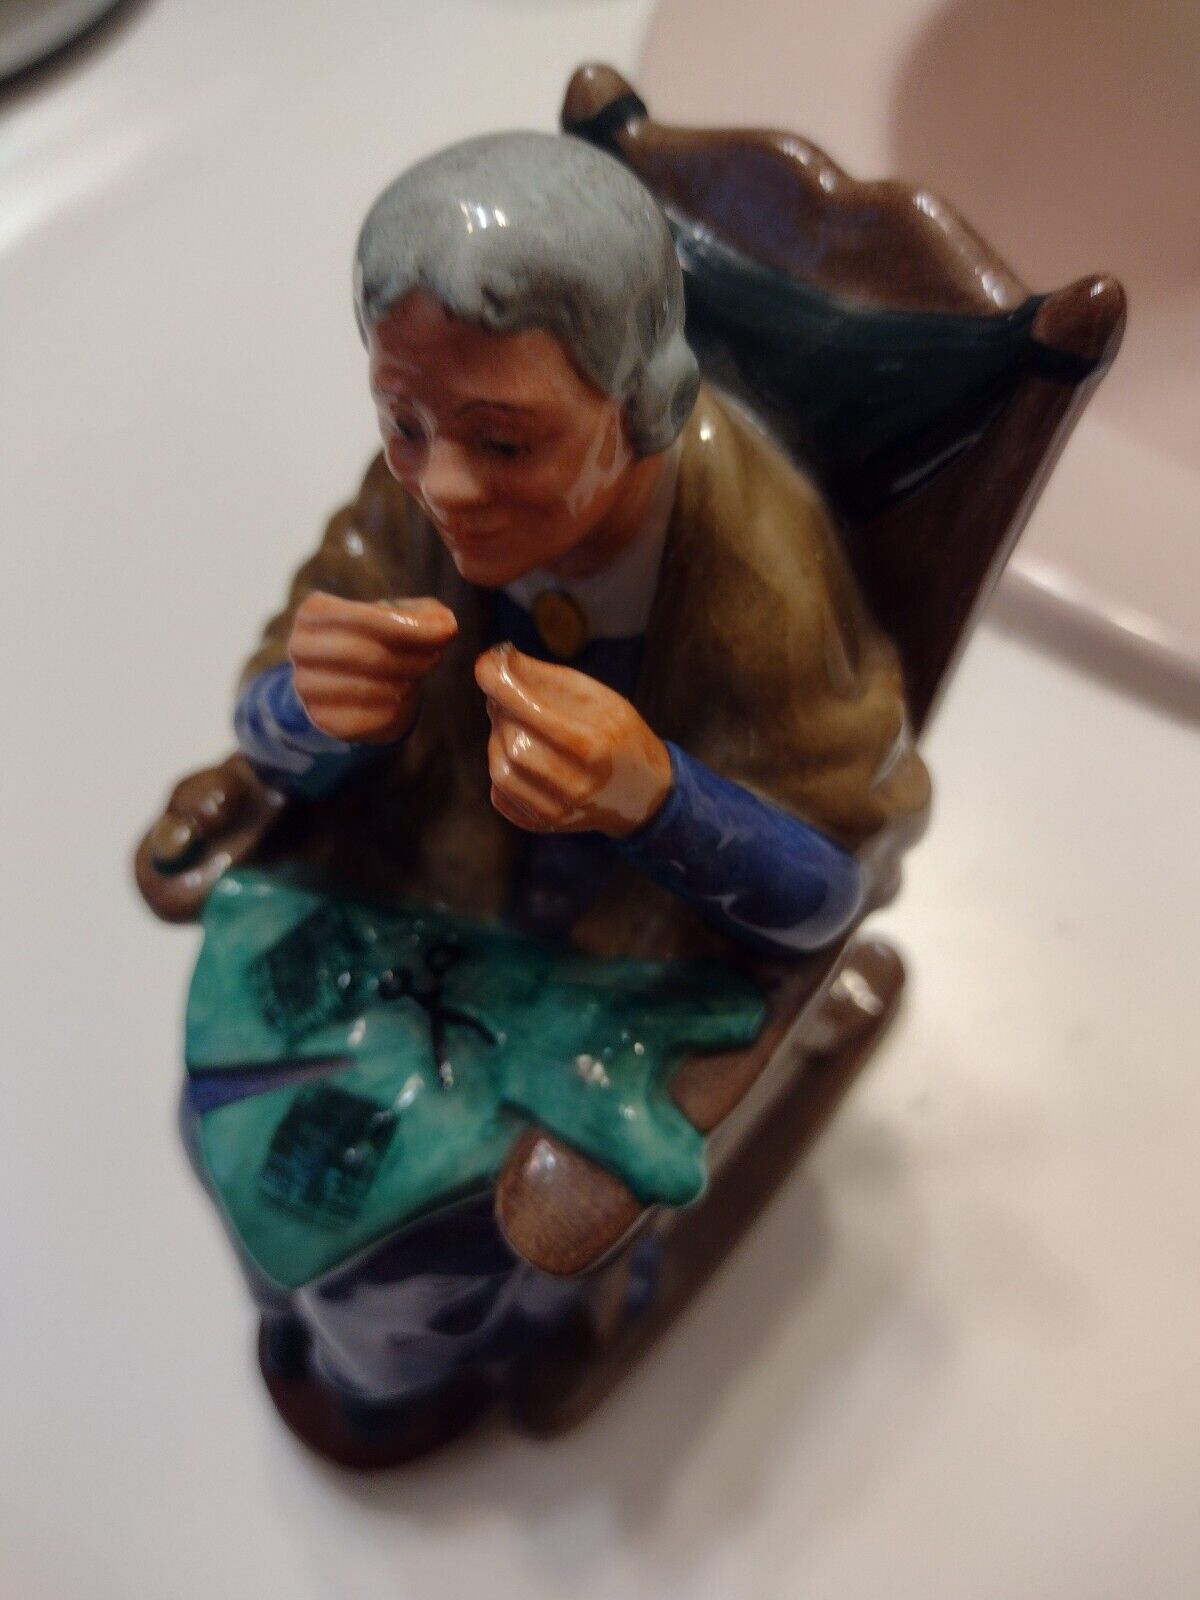 Royal Doulton handpainted collectible figurine